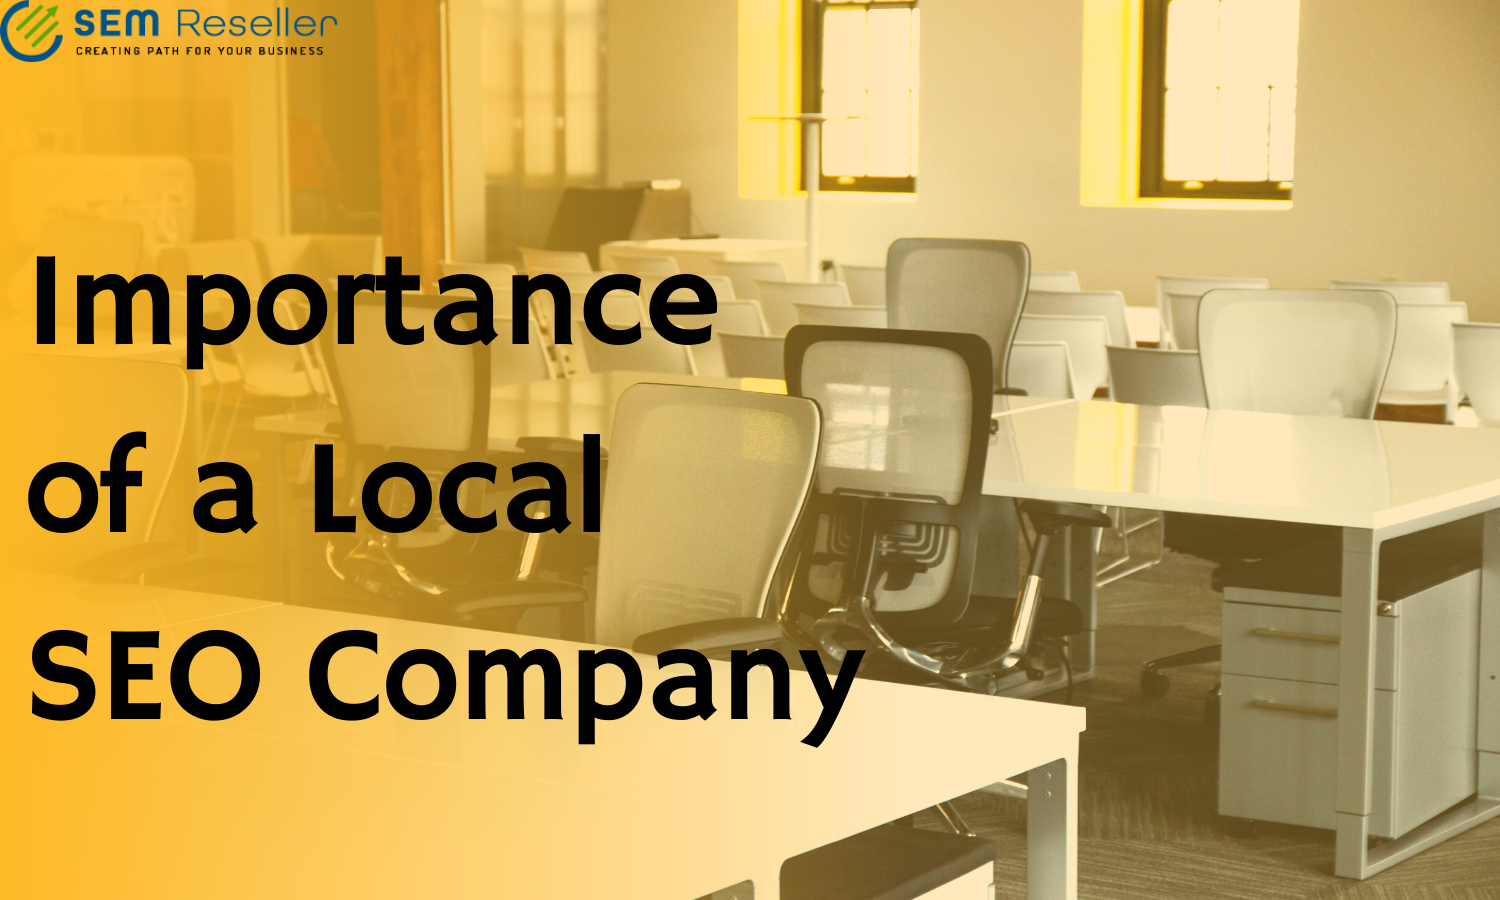 Why Can’t You Ignore the Importance of a Local SEO Company